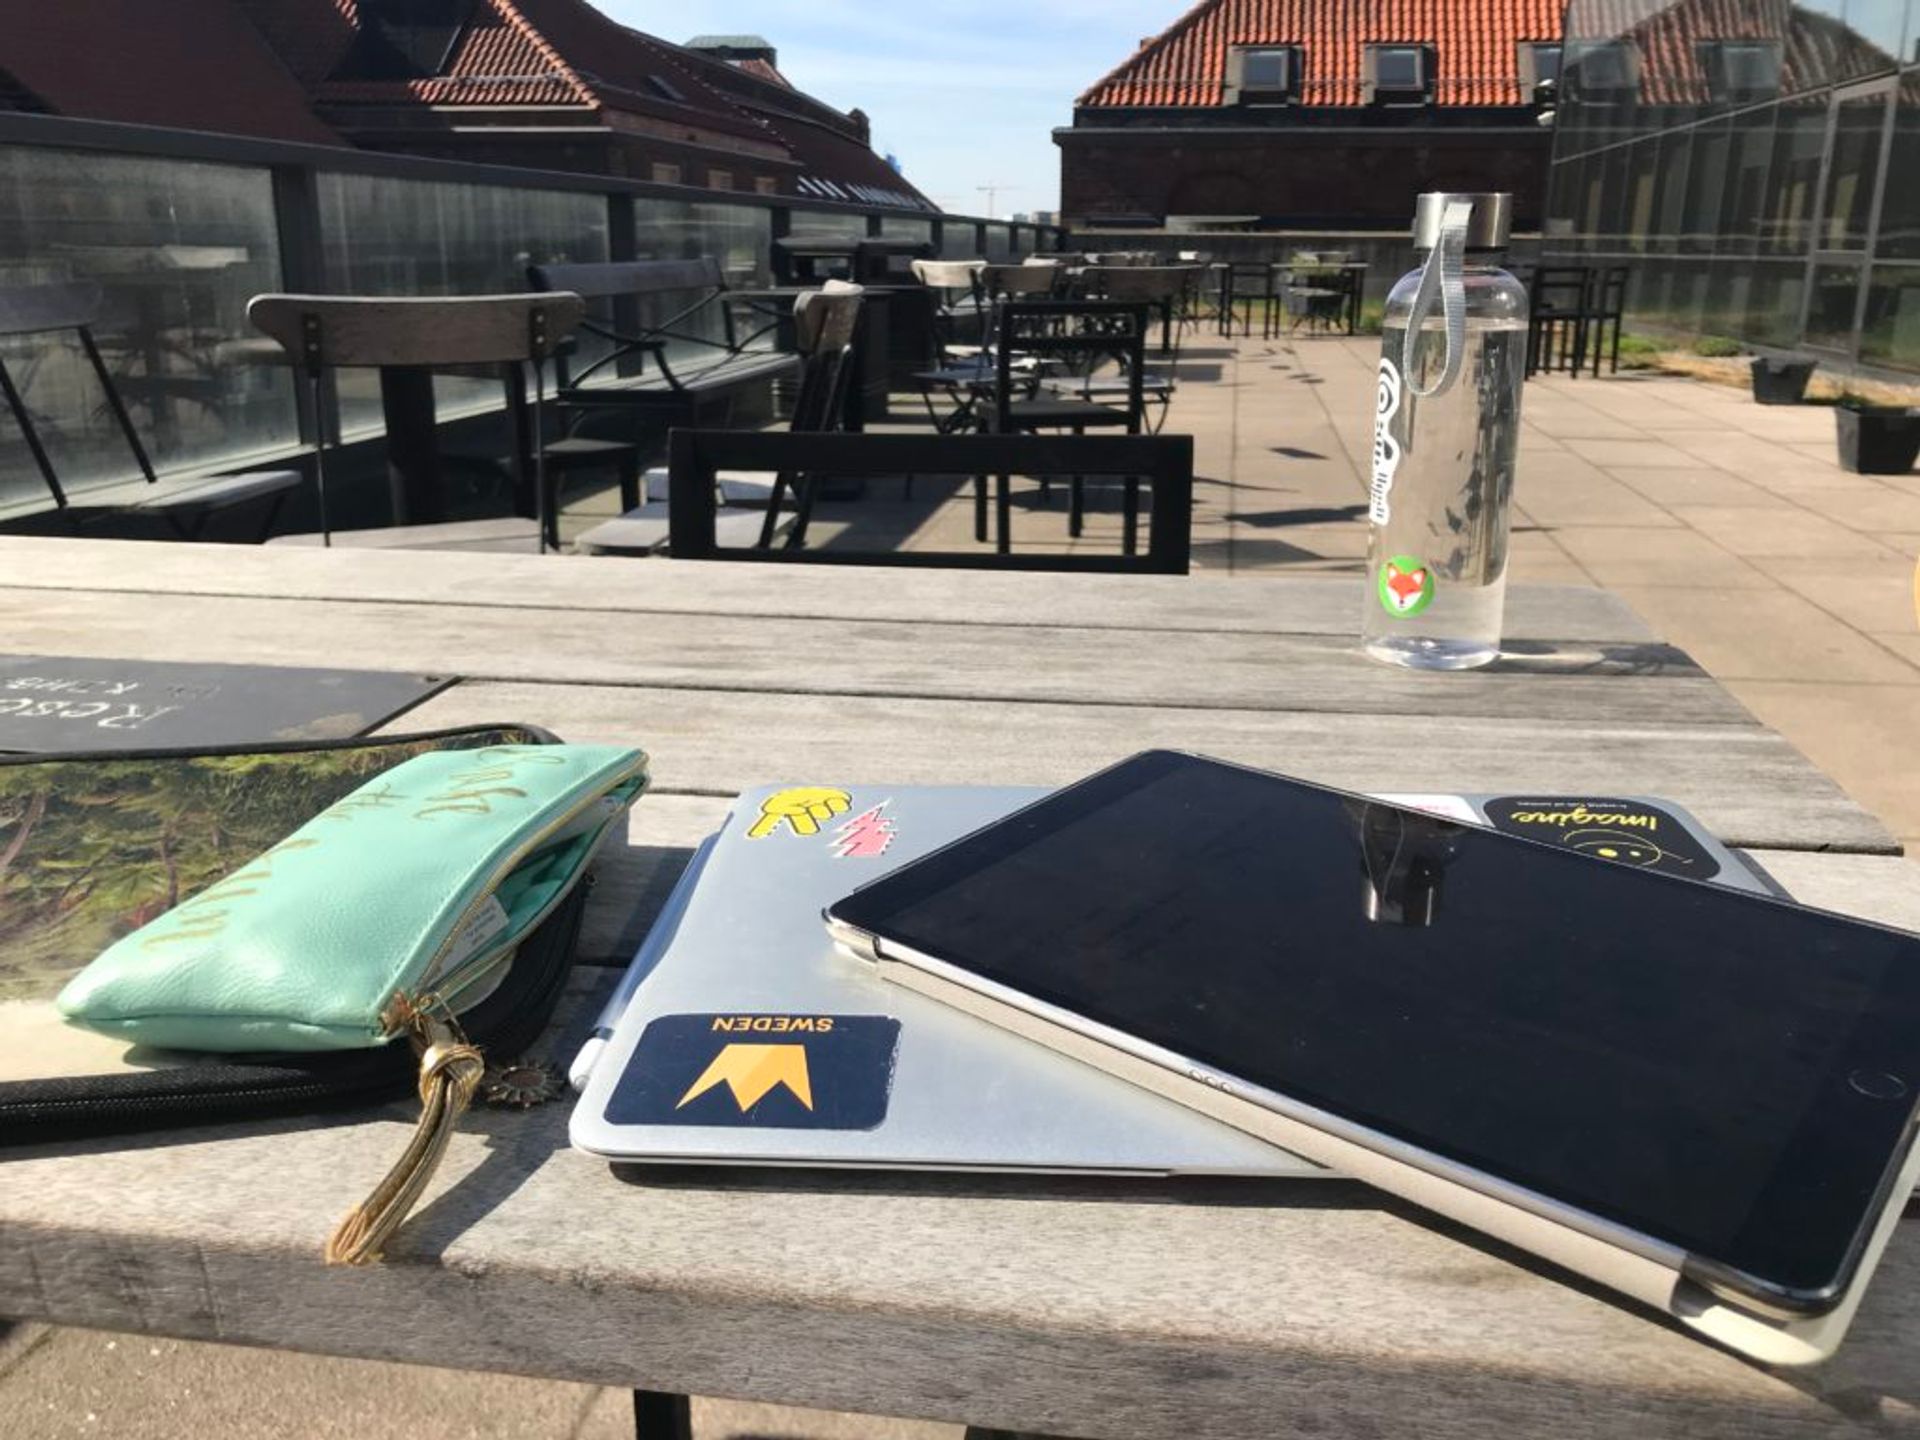 Laptop, notebook and bottle of water on a bench outside.